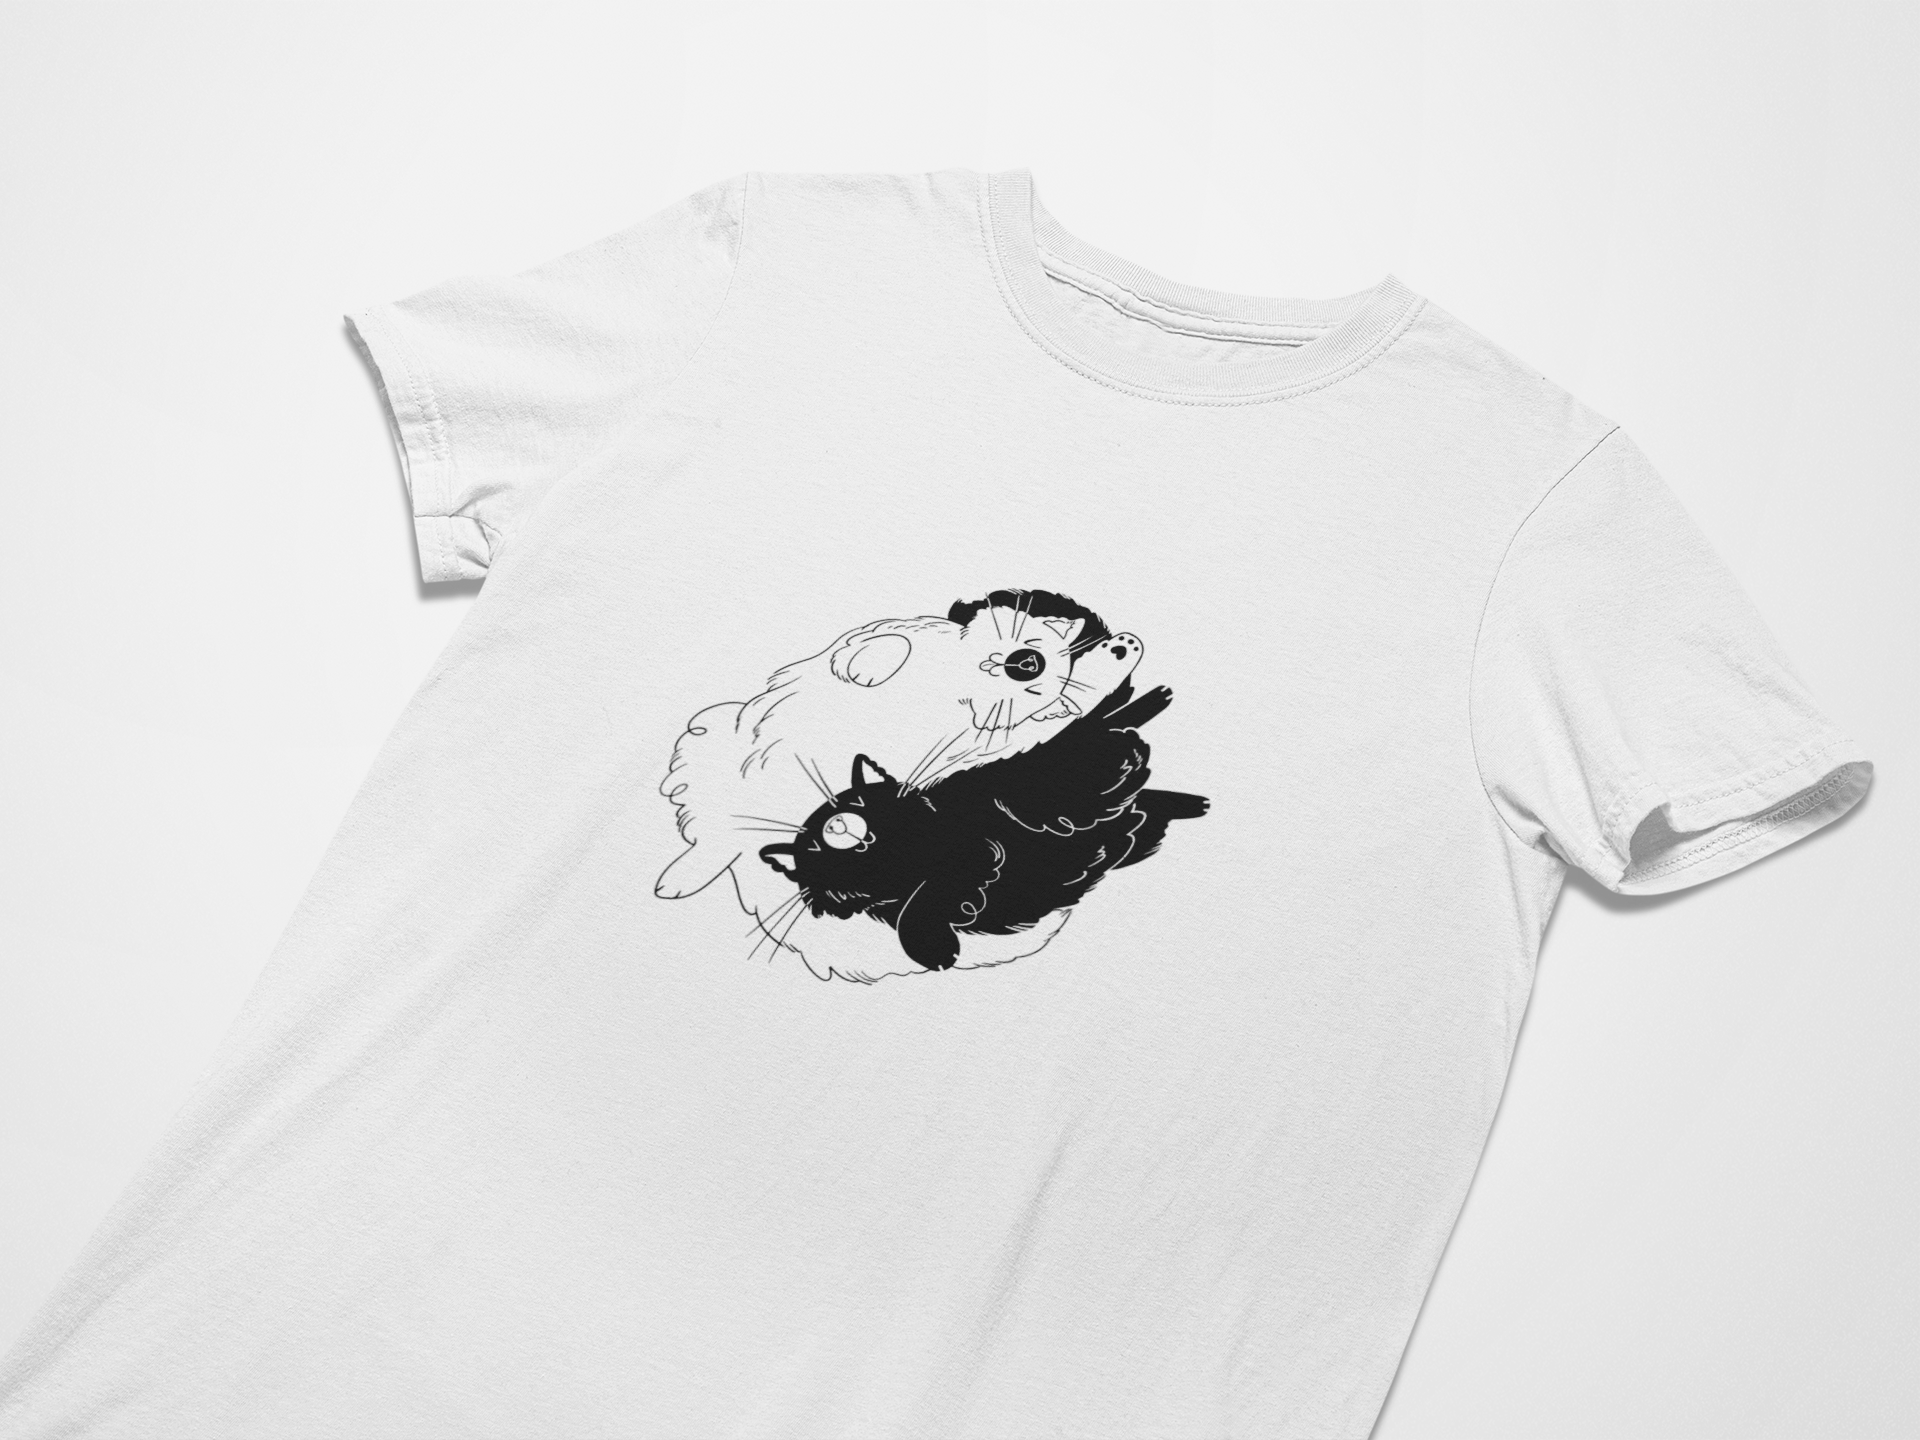 "Ying Yang Cats" - Exclusive Limited Edition Cat Culture Unisex T-Shirt by Niki Waters